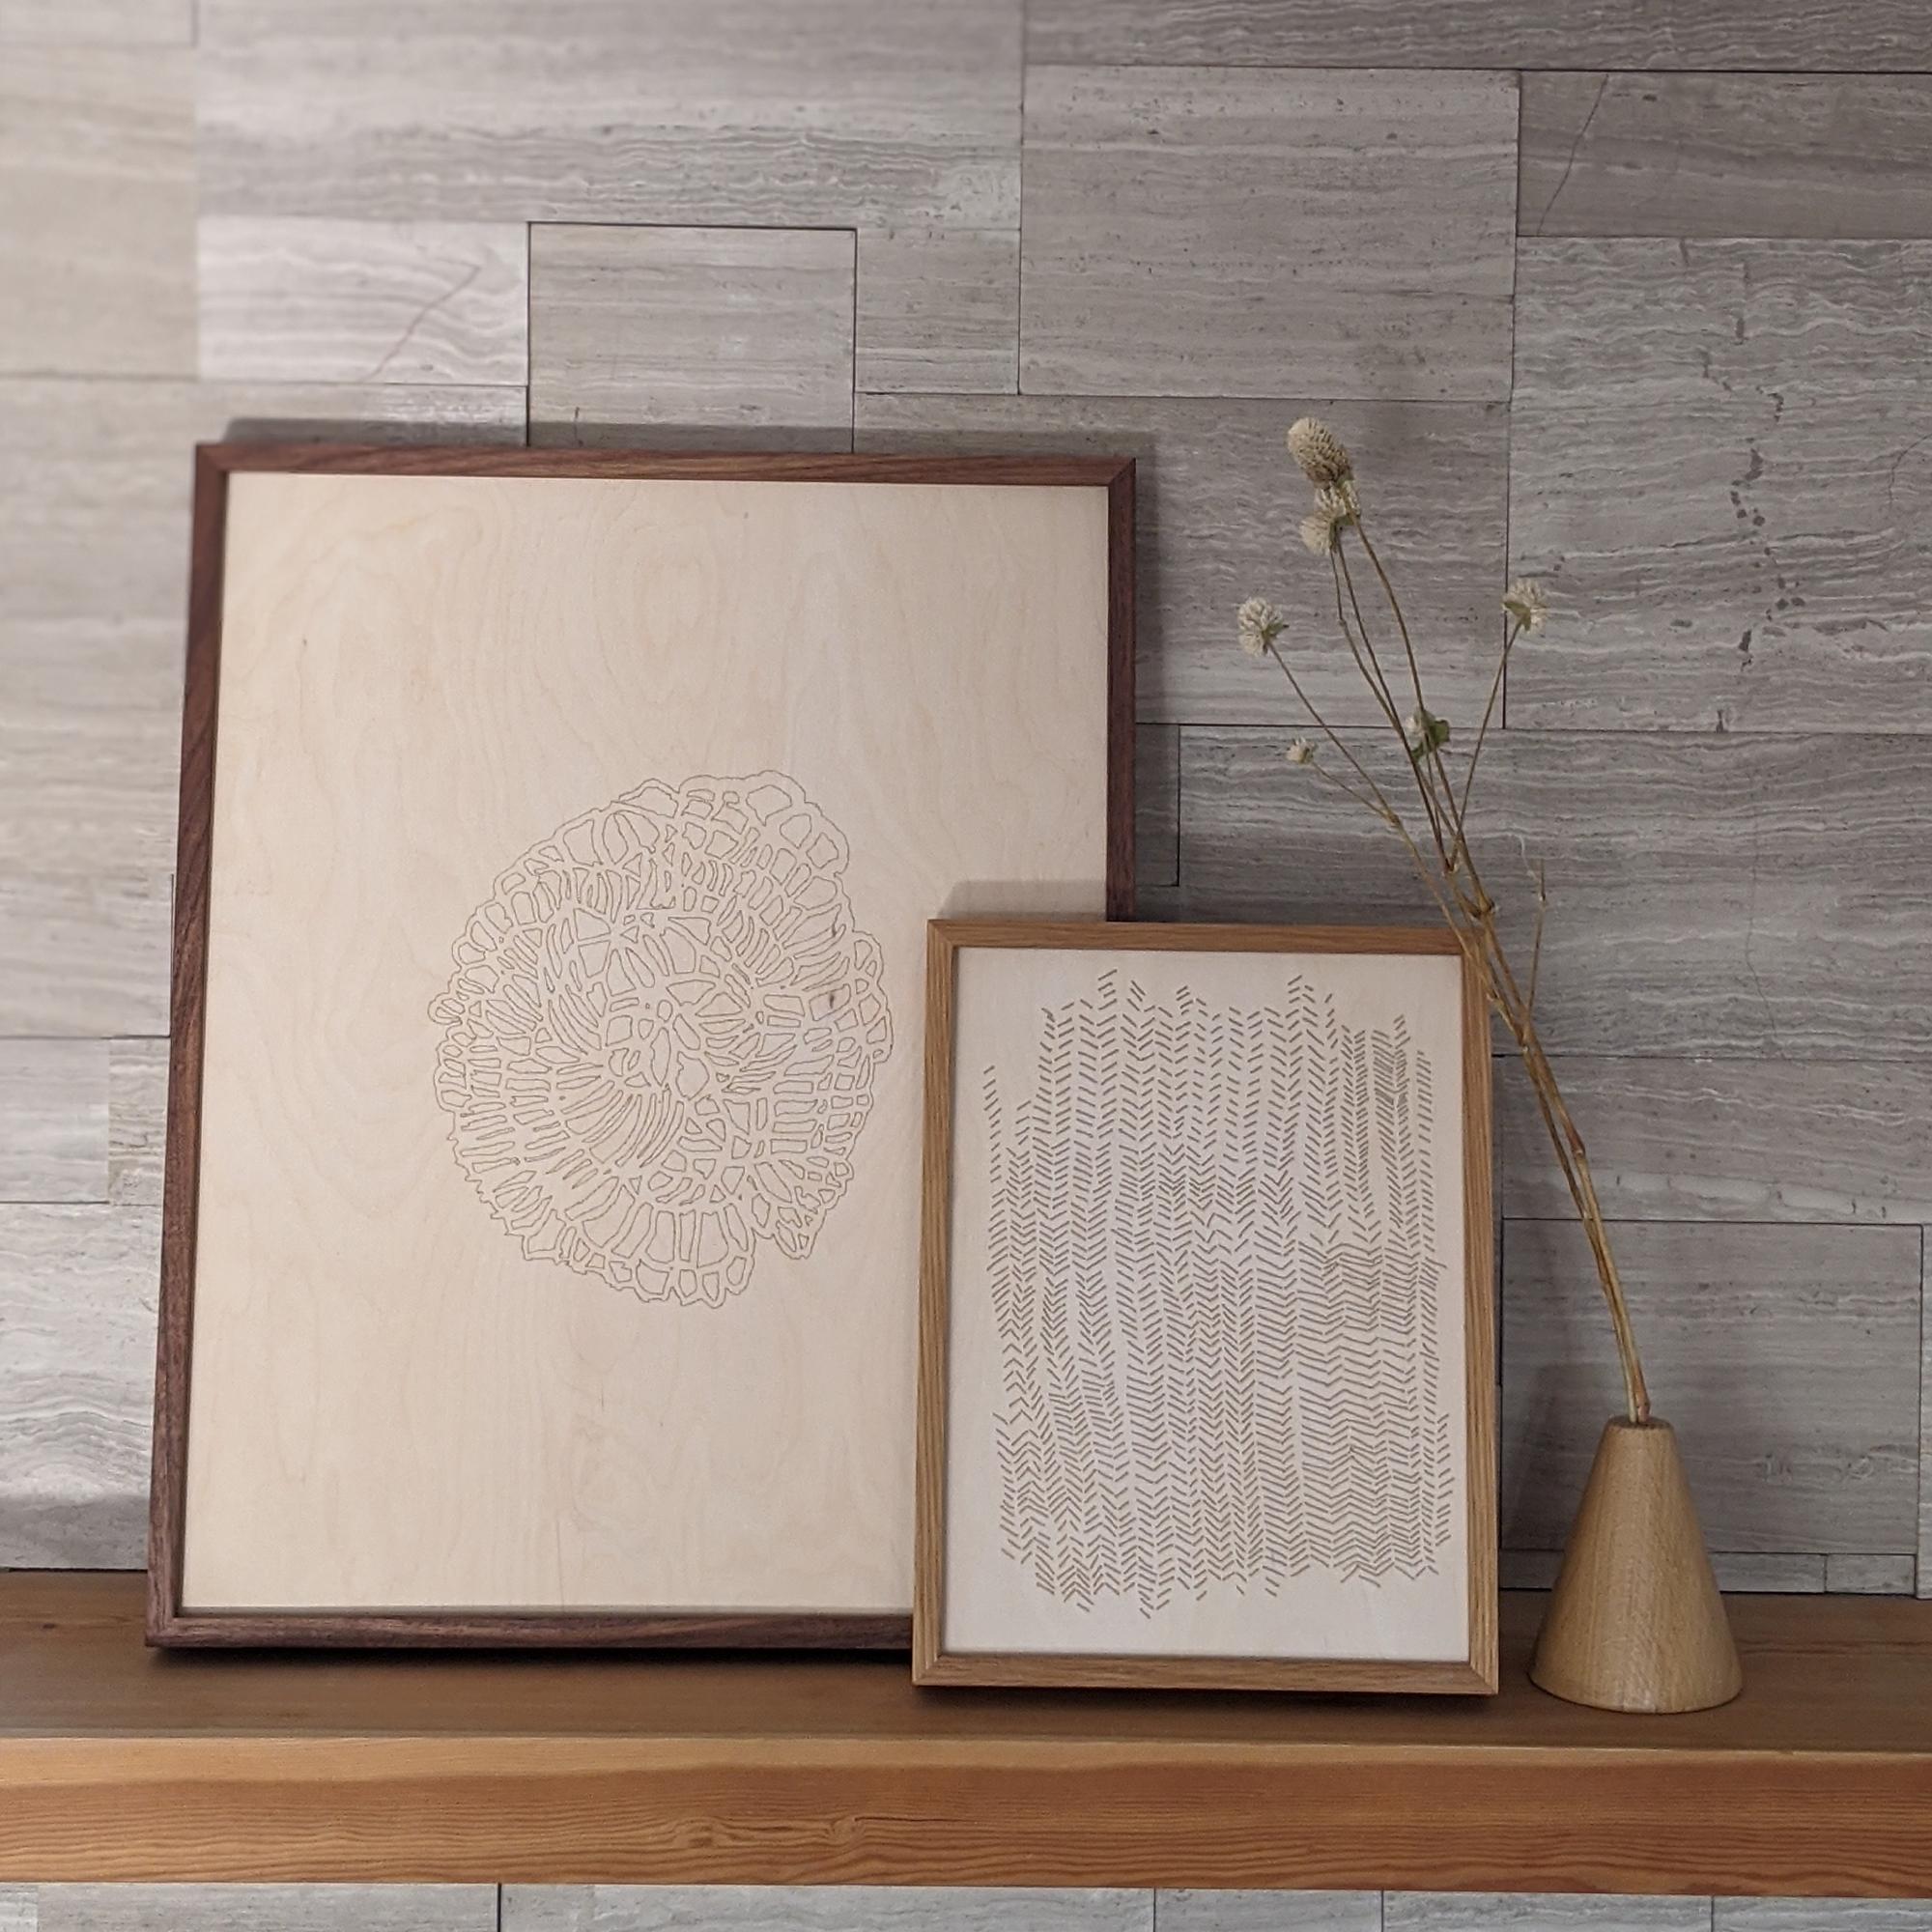 Hanging artwork on your wall is a wonderful commitment and these In Prints are definitely worth it. These prints are etched into white washed baltic birch plywood in a variety of sizes. 
Displaying meaningful items that will be beautiful for years